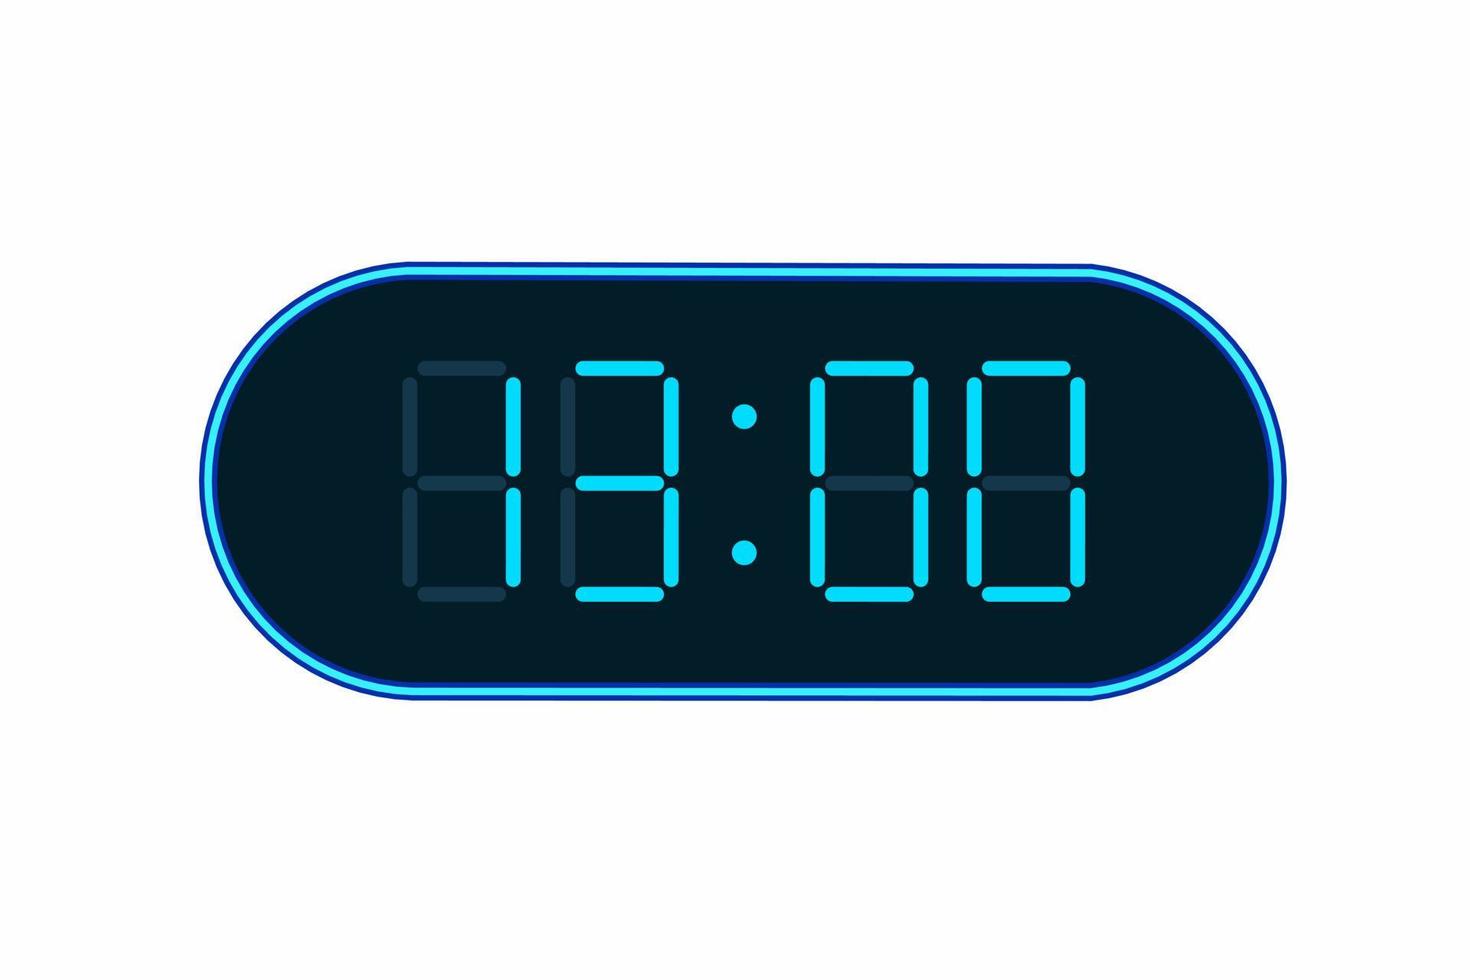 Vector flat illustration of a digital clock displaying 13.00 . Illustration of alarm with digital number design. Clock icon for hour, watch, alarm signs